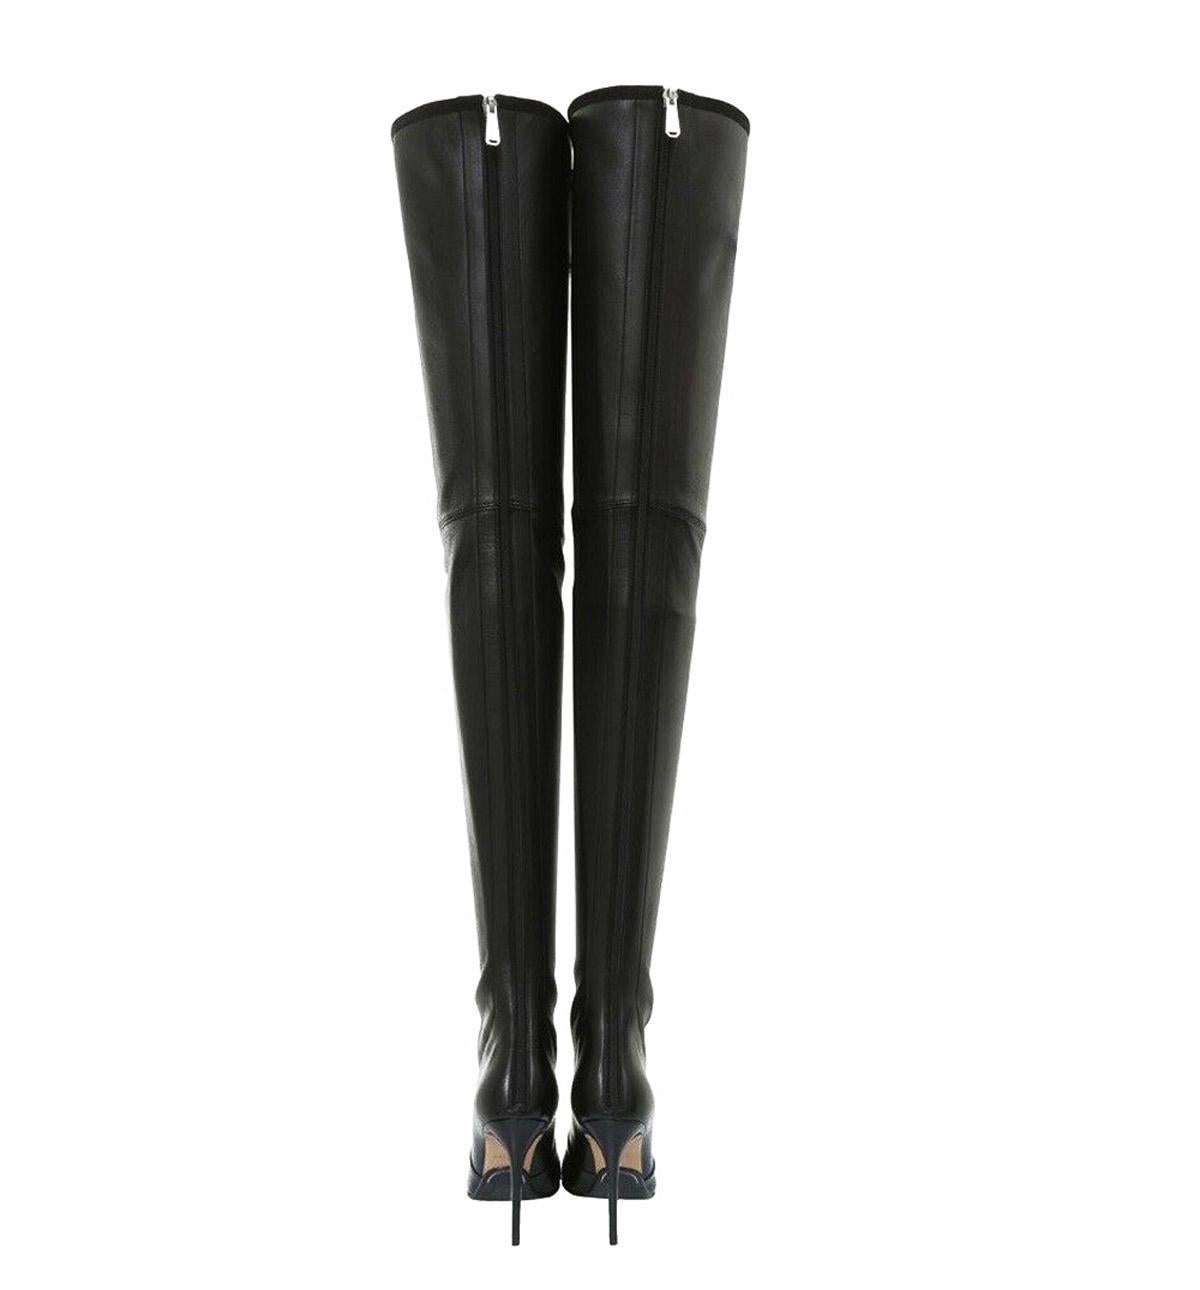 New Balmain Black Stretch Leather Over-the-Knee Thigh-High Boots
Designer sizes available -  36, 37, 37.5, 38, 38.5 - US sizes 6, 7, 7.5, 8, 8.5
Soft Stretch Leather, 100% Lambskin, Back Zip Closure, Pointed Toe-Line.
Measurements approx.: Total